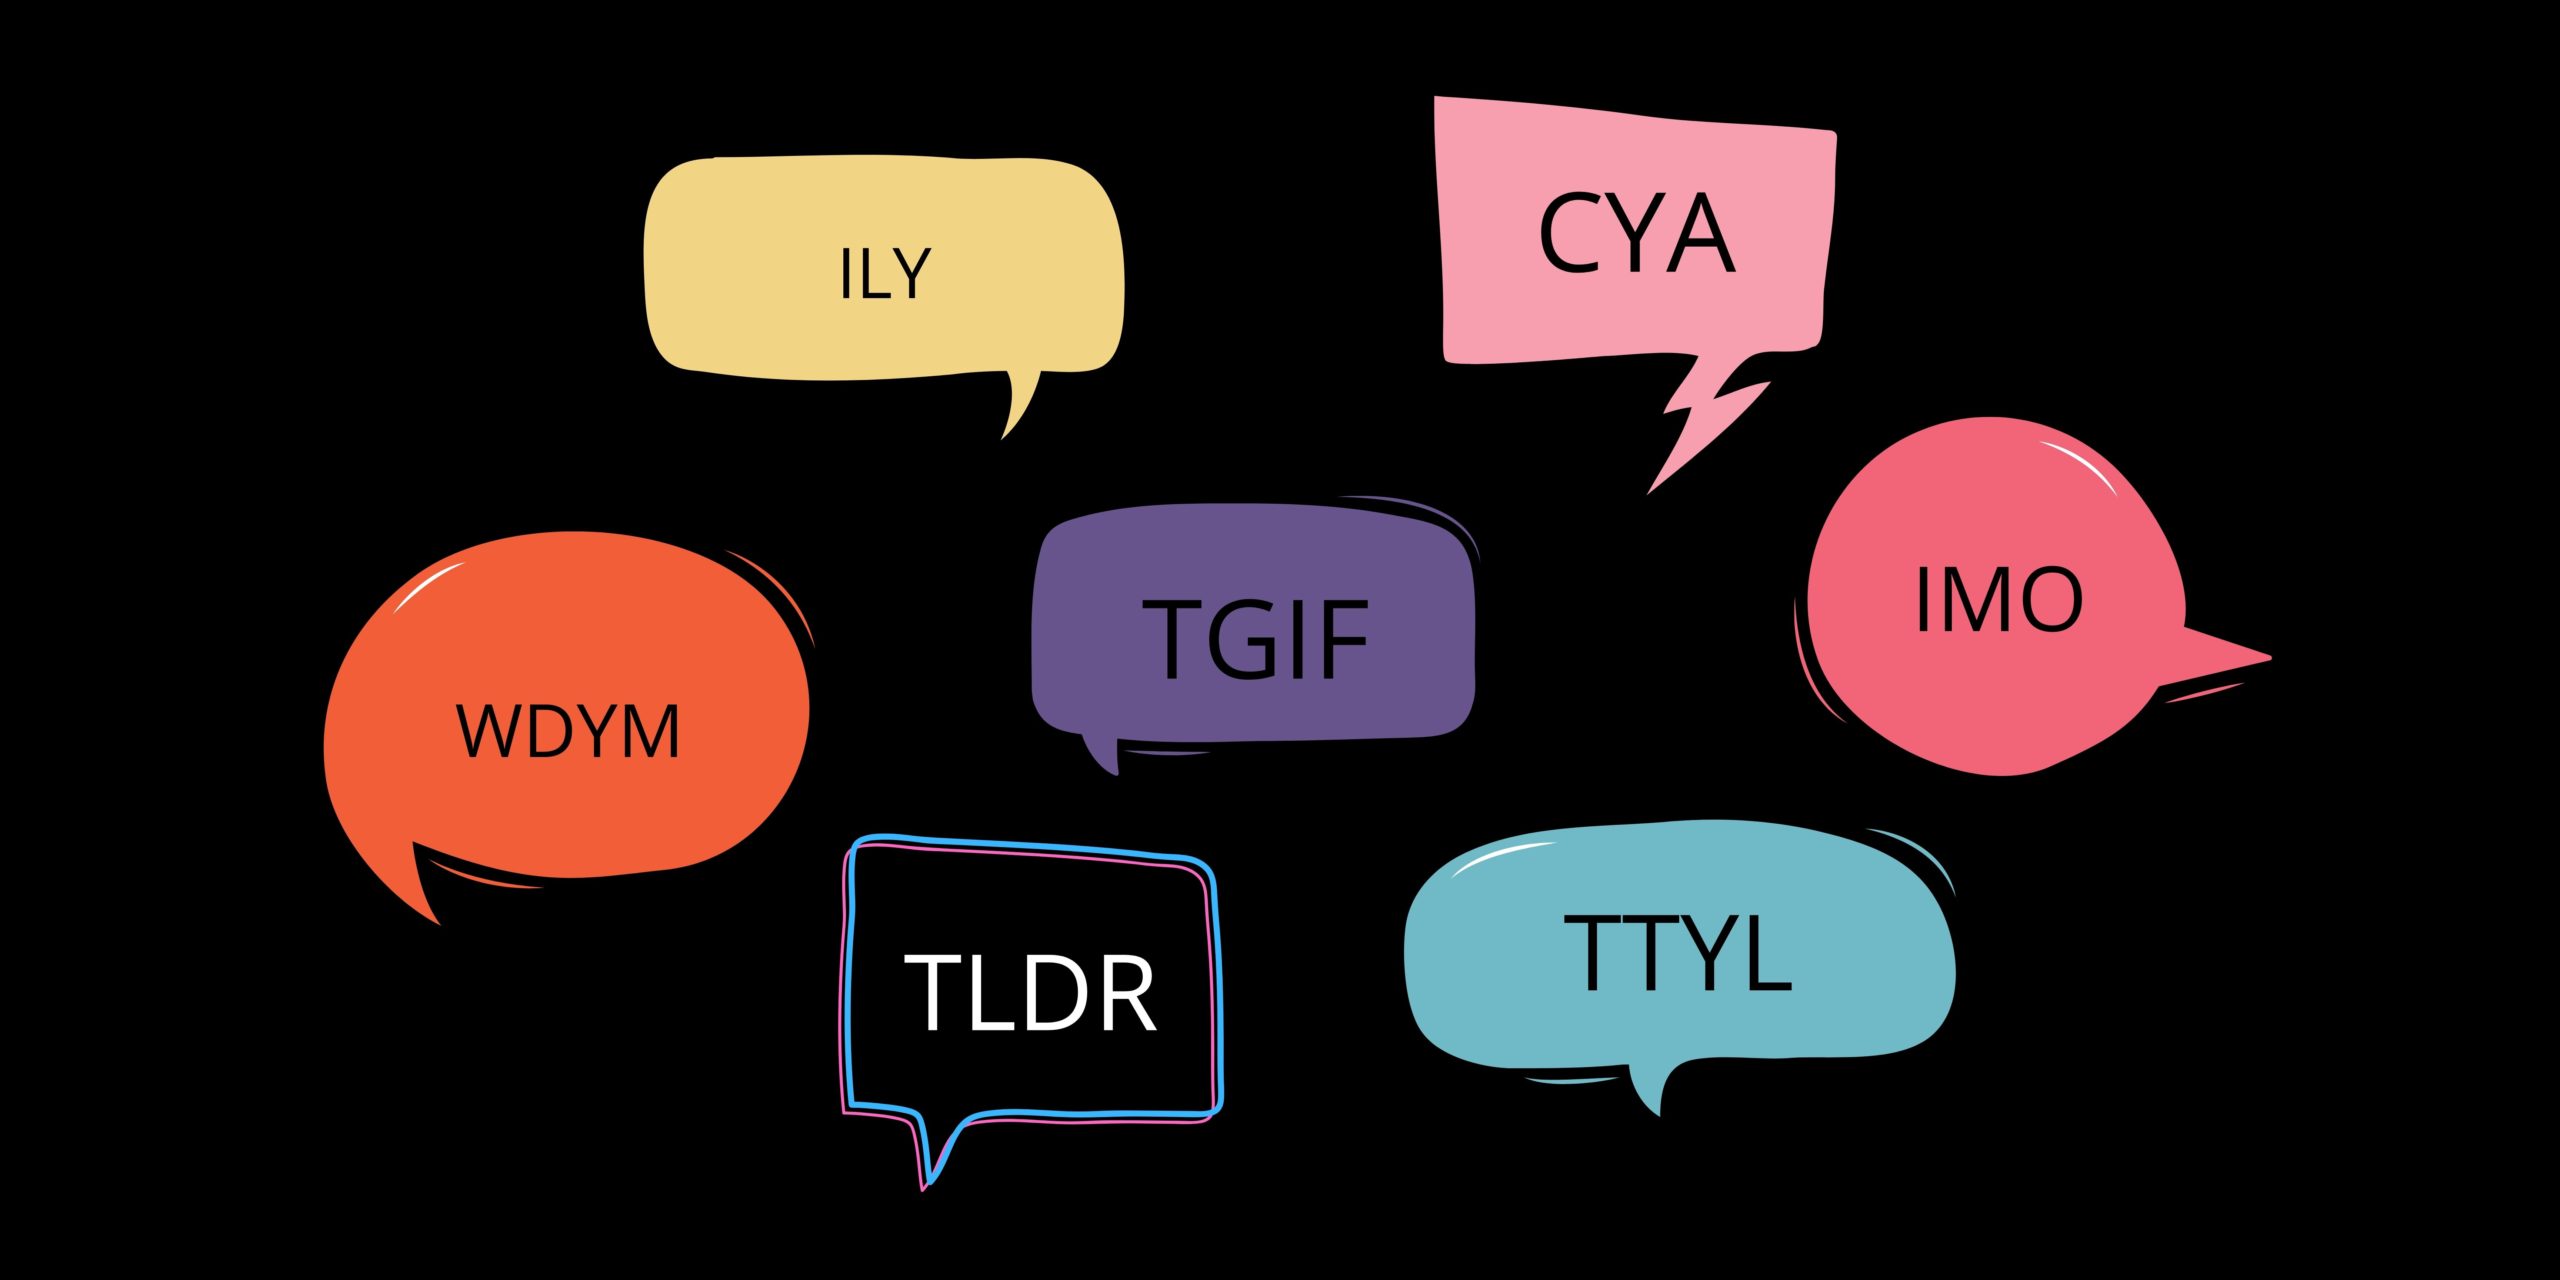 Popular Texting Abbreviations and Internet Acronyms in English